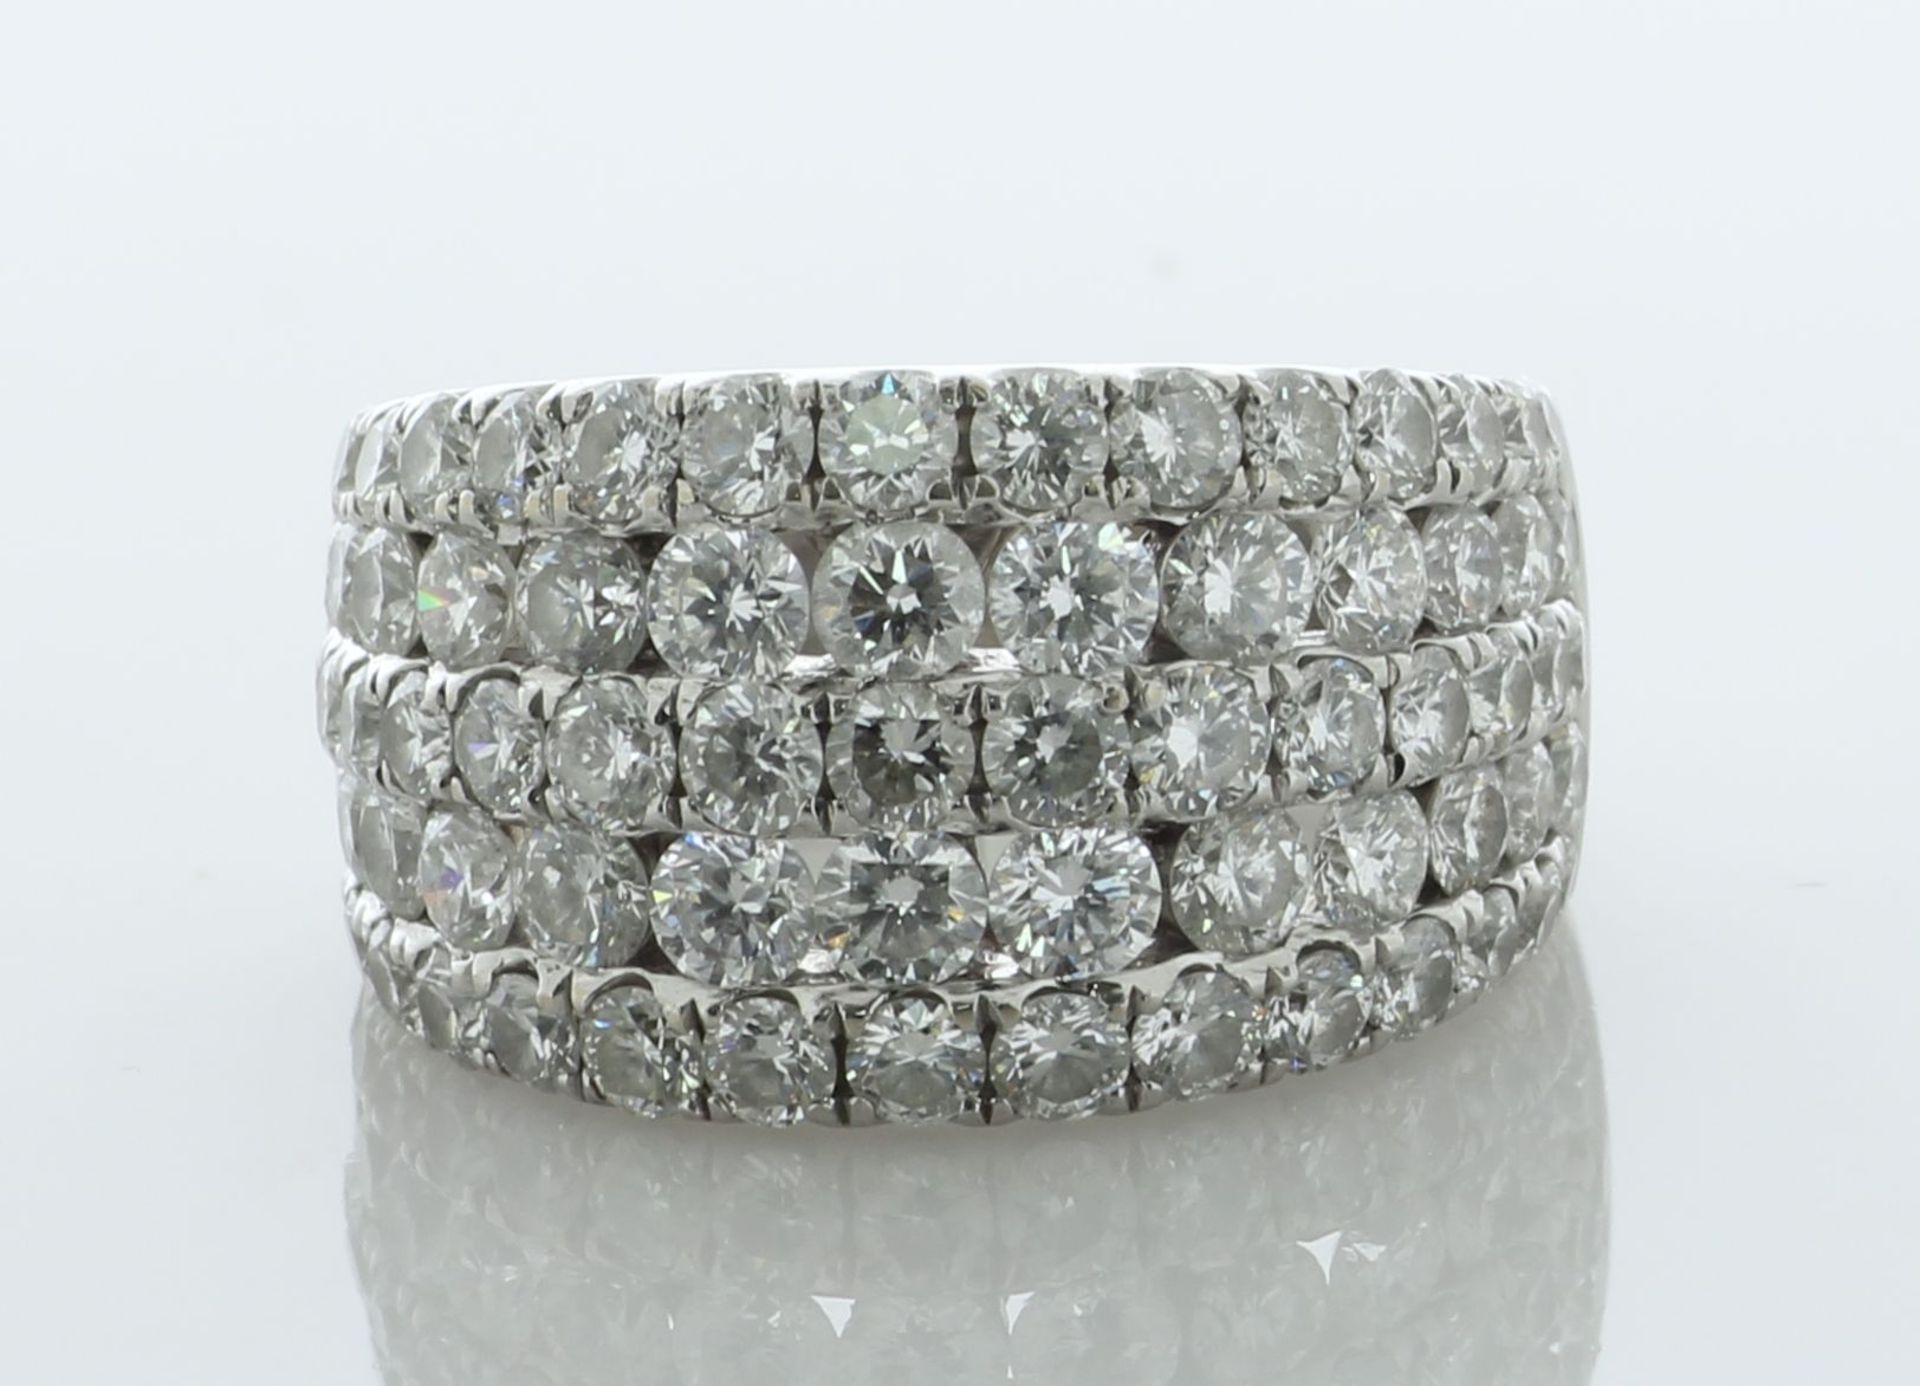 18ct White Gold Half Eternity Diamond Ring 3.00 Carats - Valued By AGI £7,895.00 - Five rows of